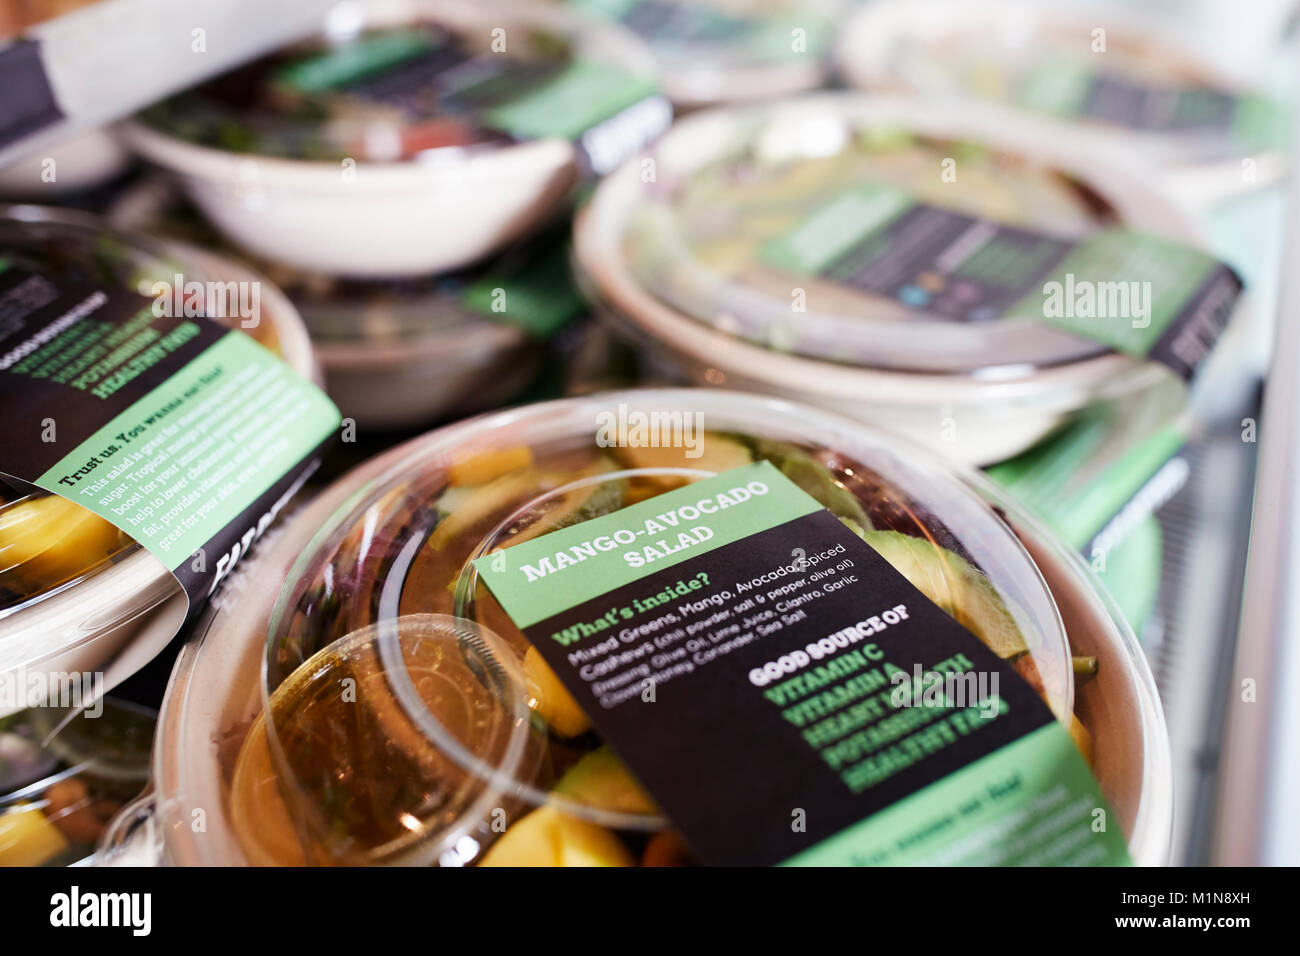 Healthy Takeaway Salads On Display In Coffee Shop Stock Photo